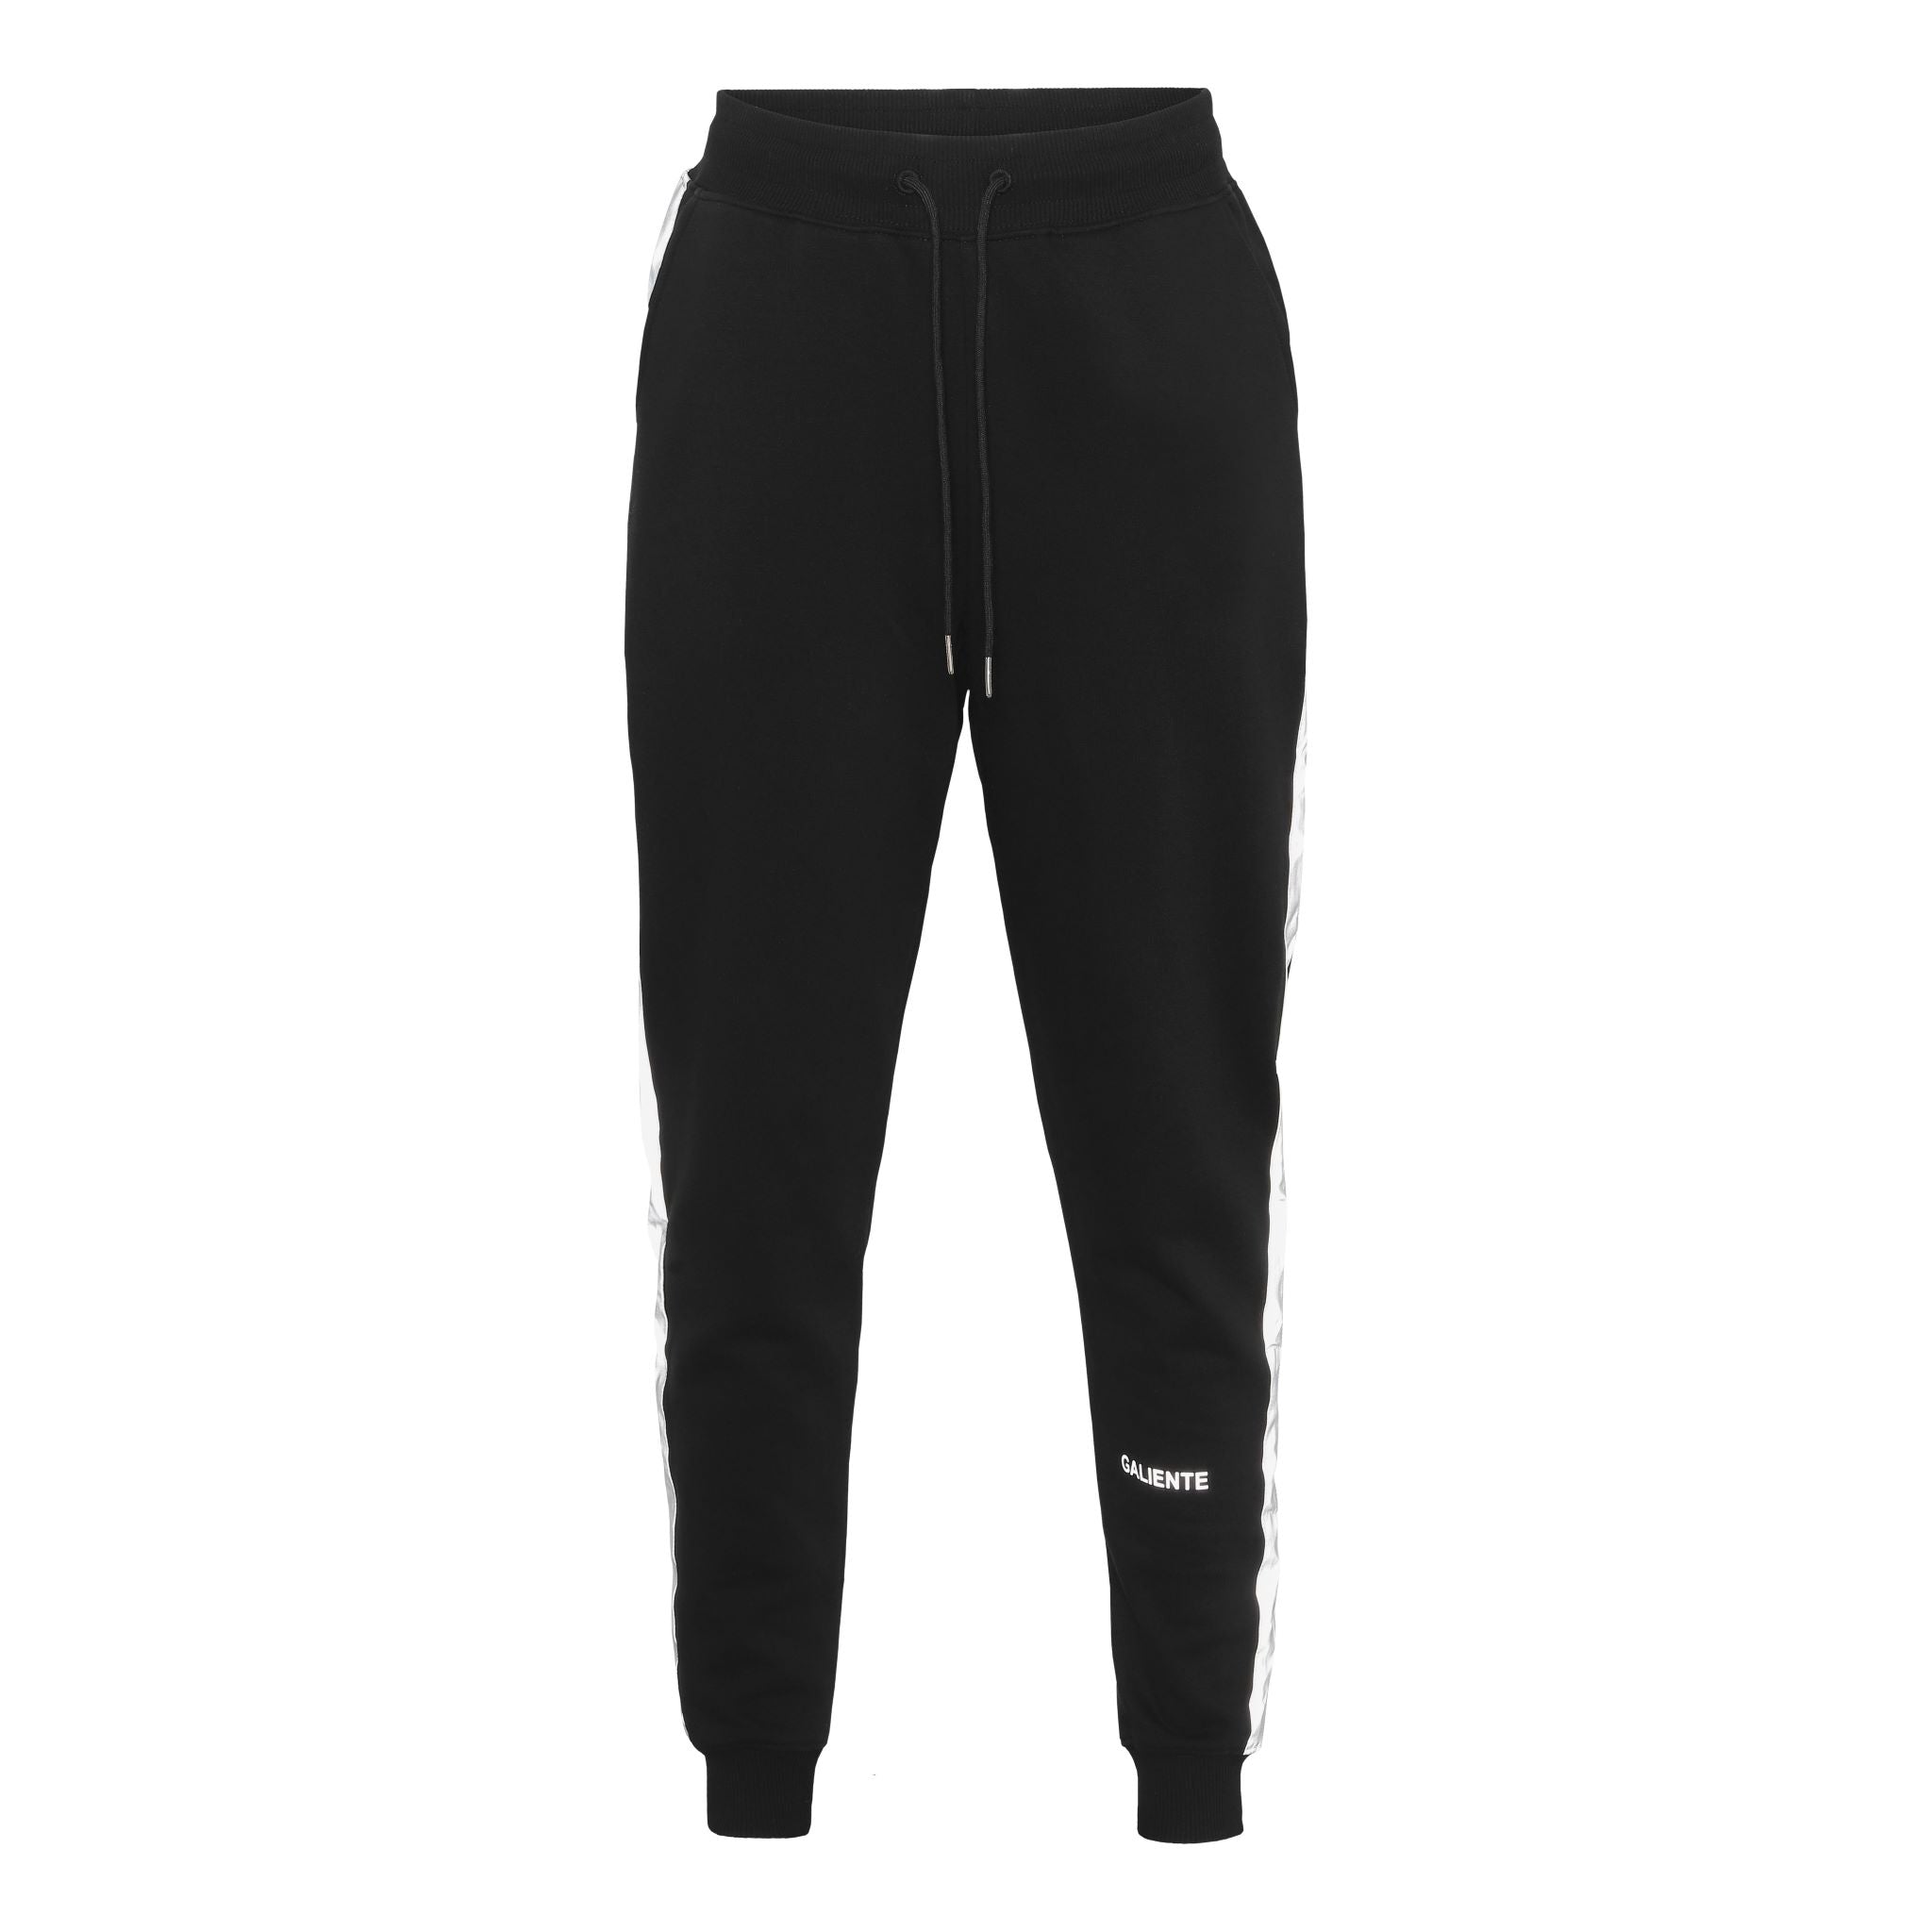 Trousers with reflective tape